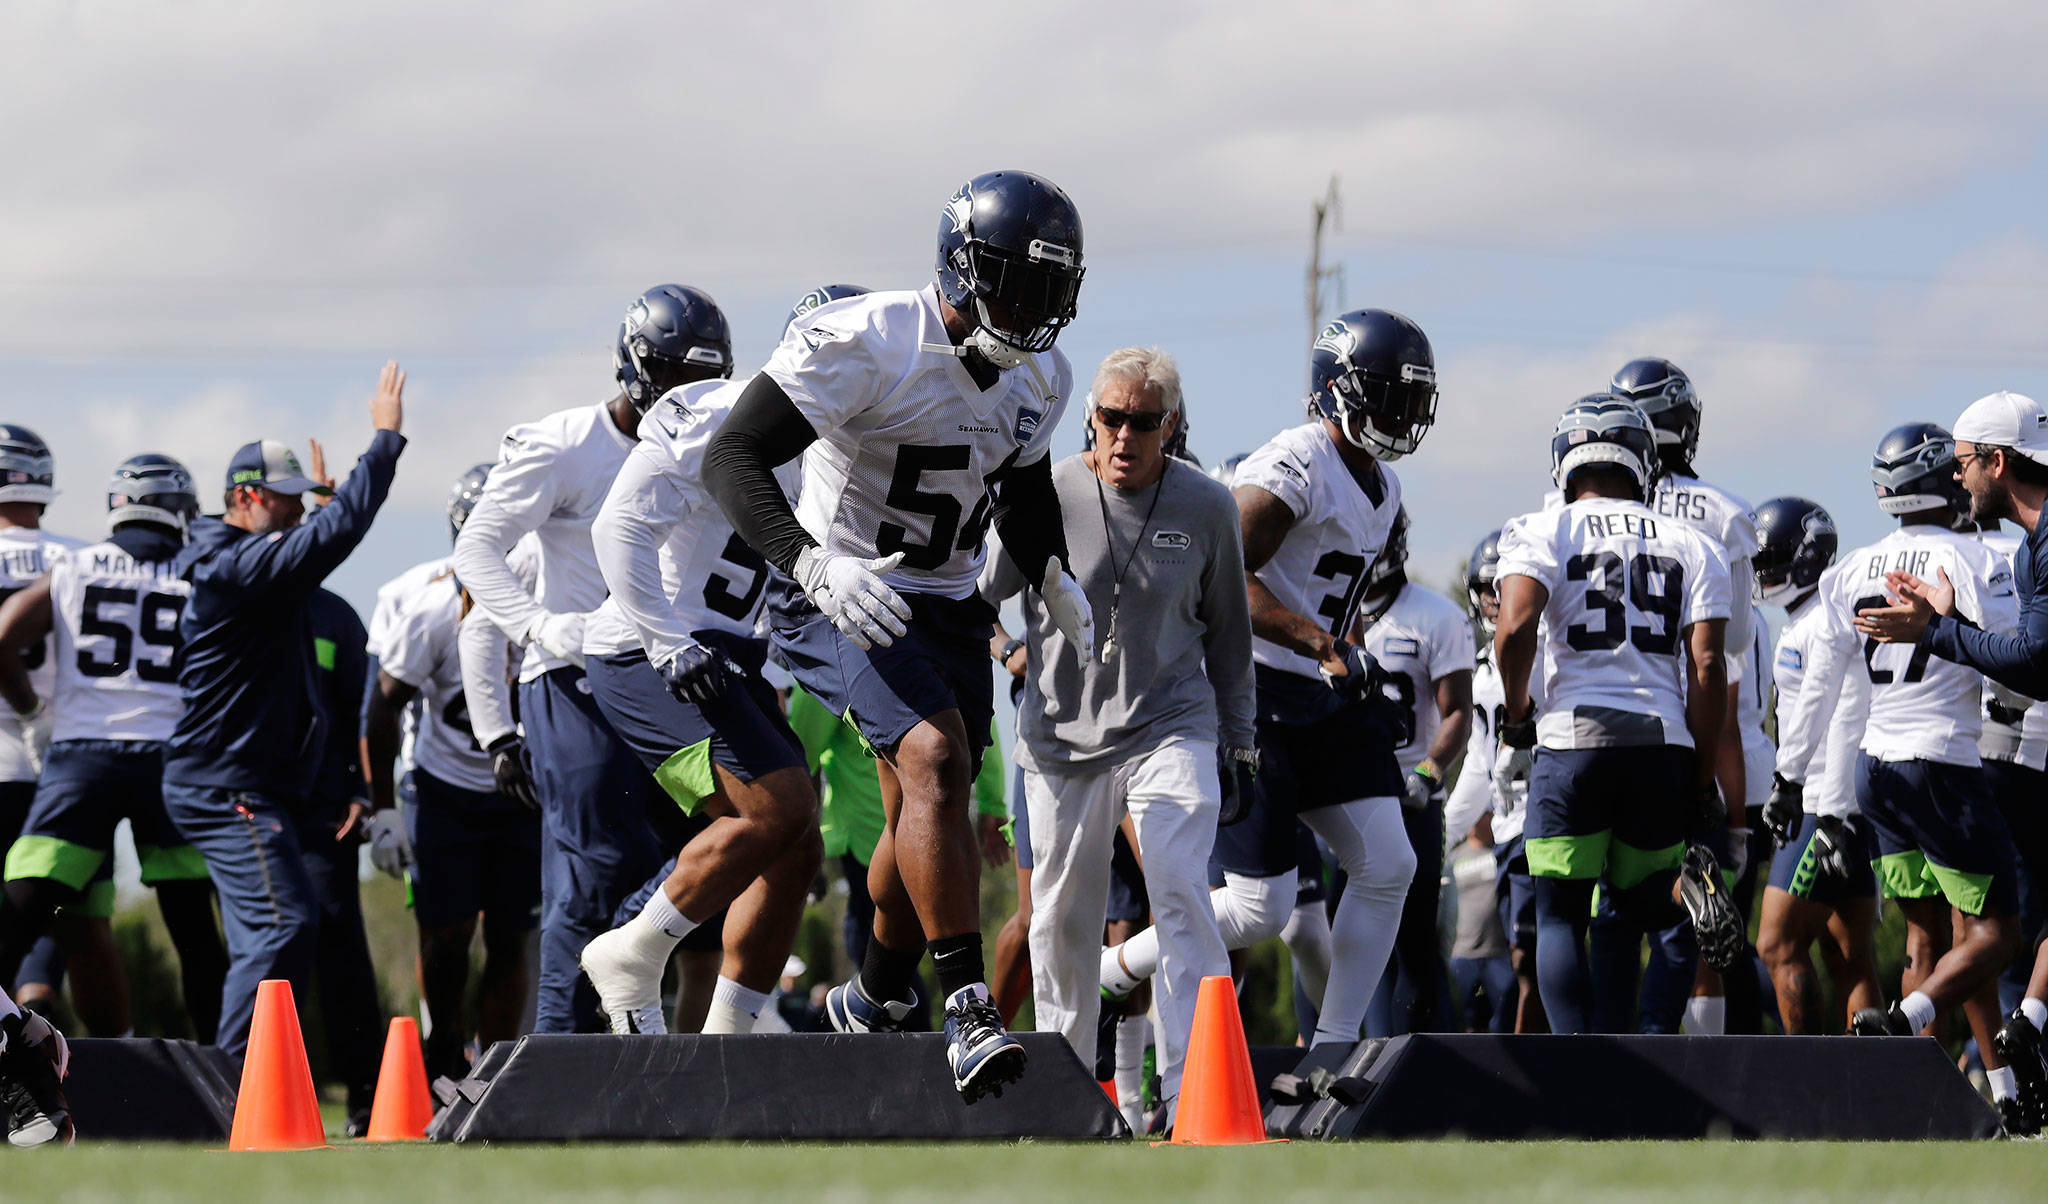 The Seahawks’ Bobby Wagner (54) leads teammates through a drill as head coach Pete Carroll (center right) looks on during training camp in 2019 in Renton. (AP Photo/Elaine Thompson)